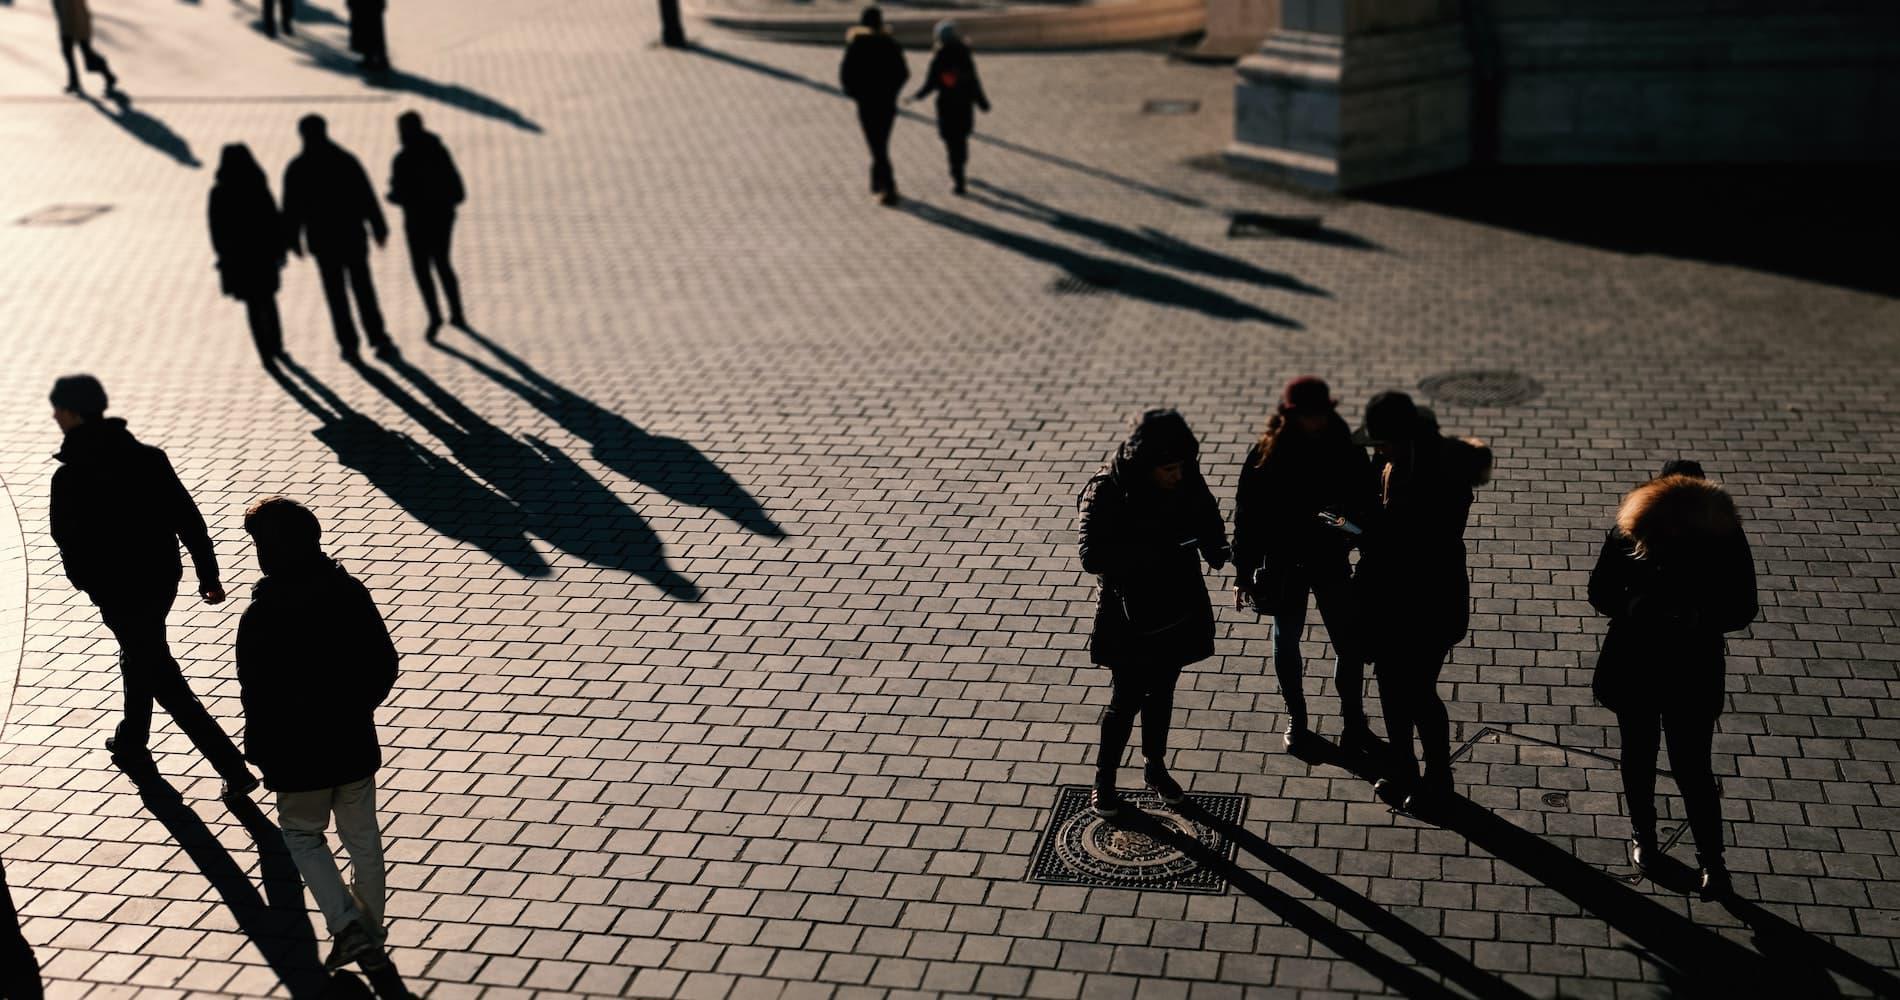 Groups of shadowed people on a cobbled street